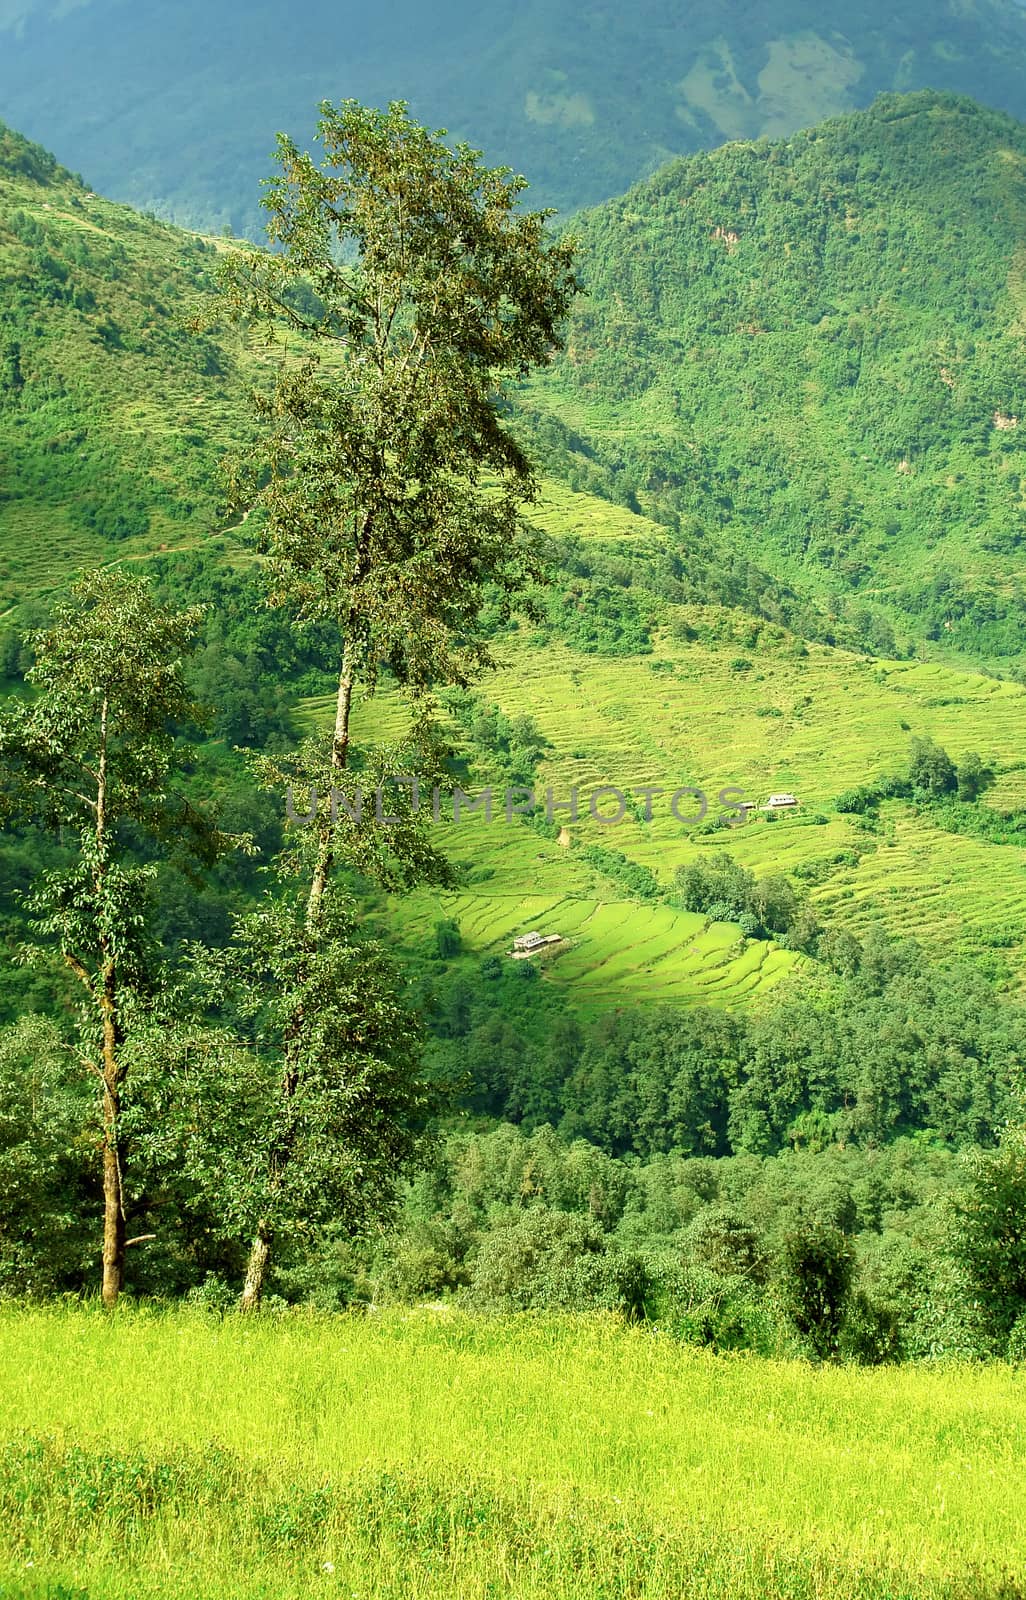 Beautiful himalayan forest landscape, trek to Annapurna Base Camp in Nepal

                               